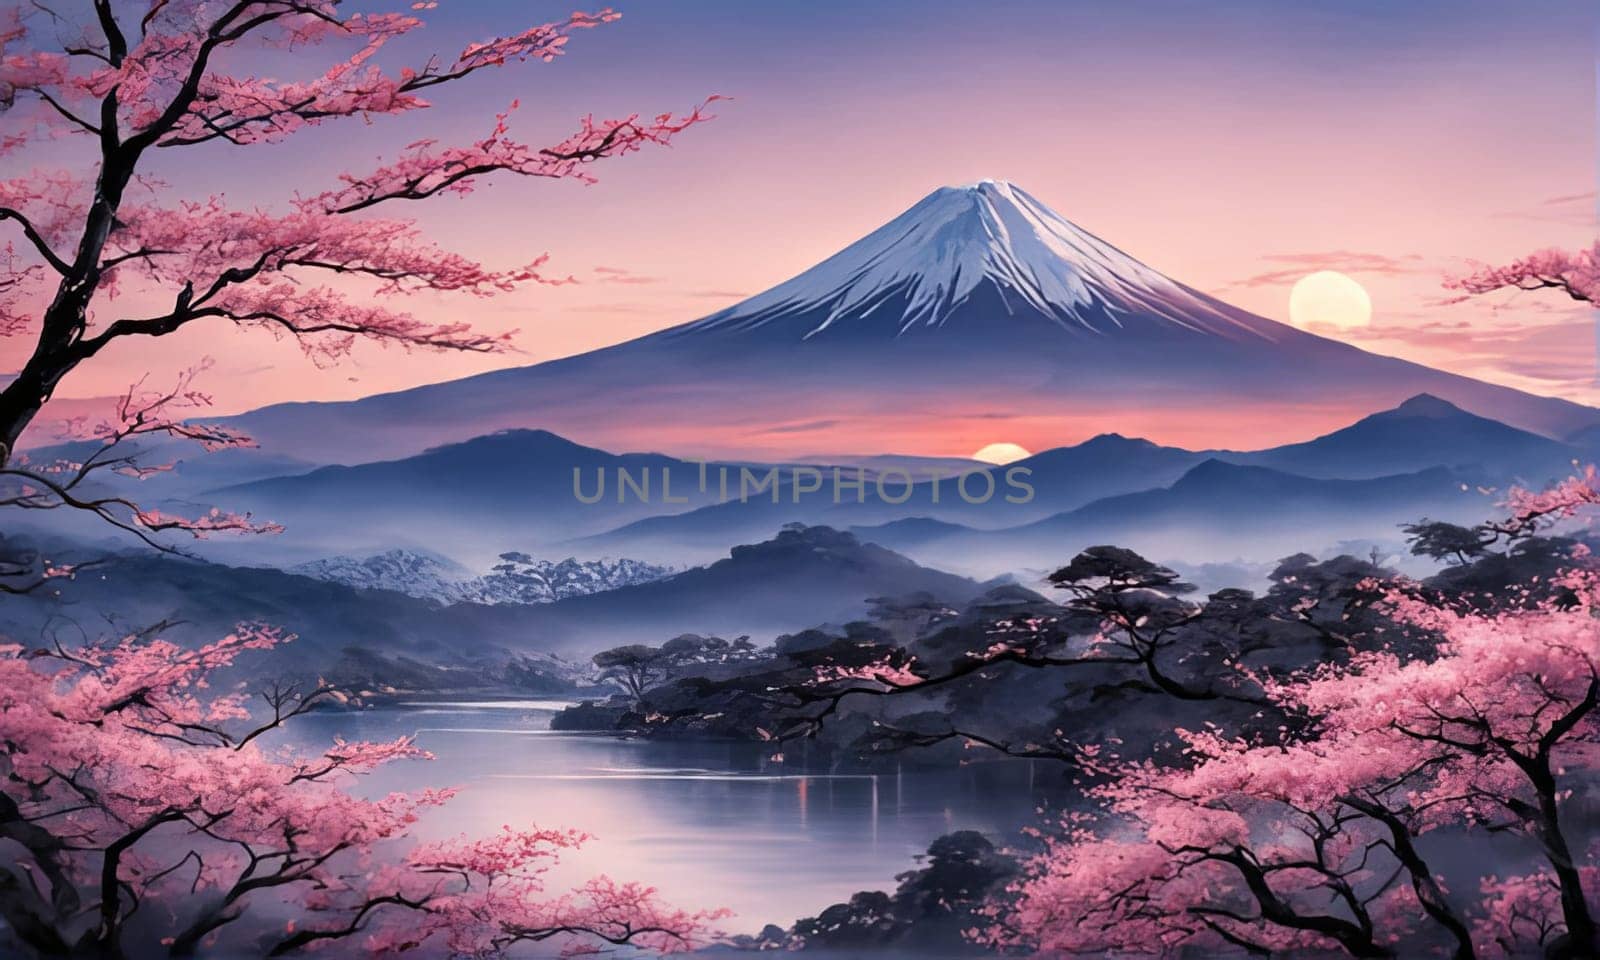 Japanese landscape adorned with delicate cherry blossoms, capturing essence of spring in Japan. For art, creative projects, fashion, style, blogs, social media, web design, print, magazine, banner